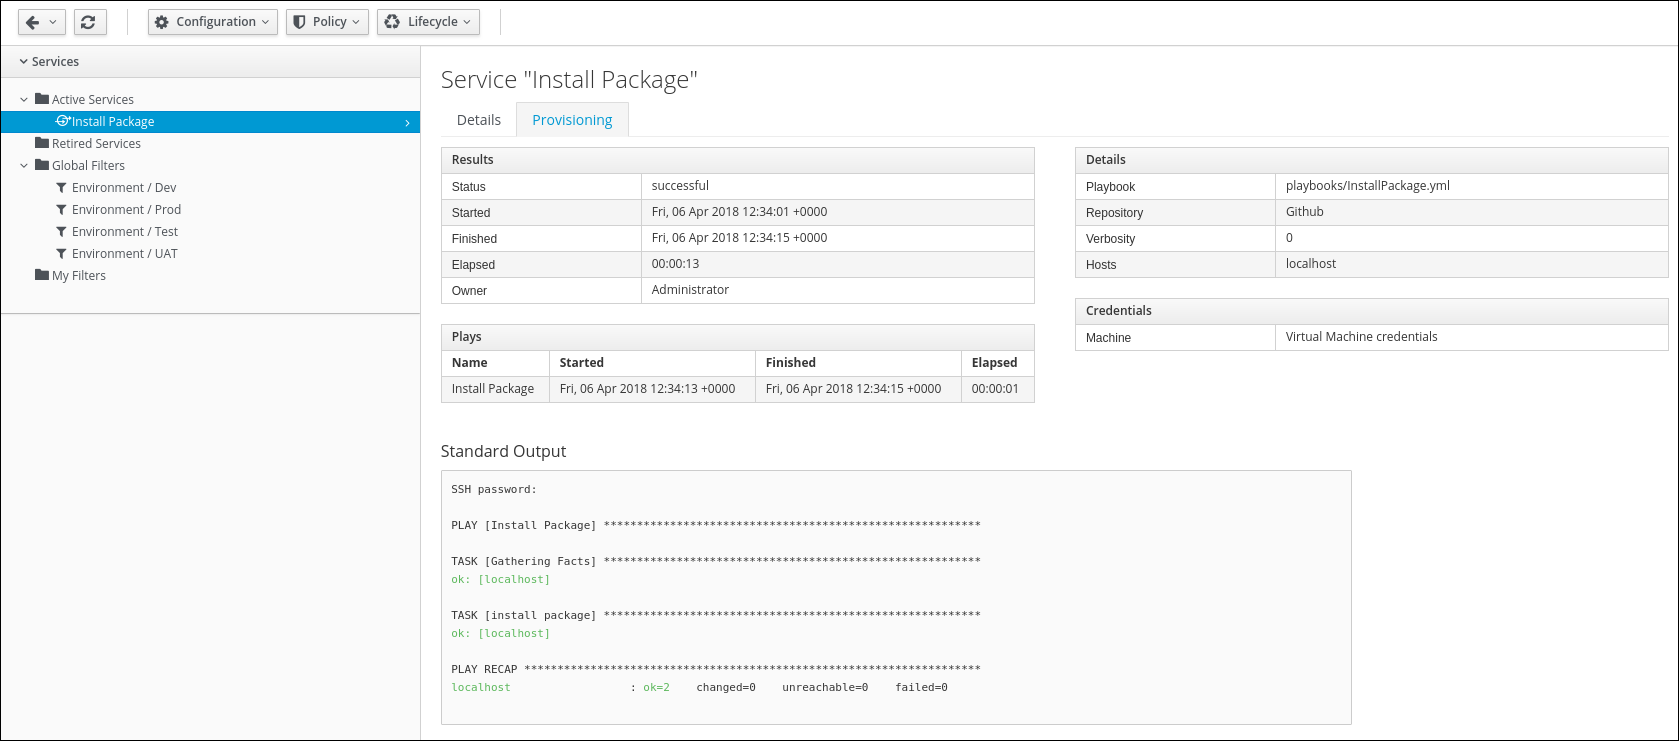 My Service Install Package Provisioning